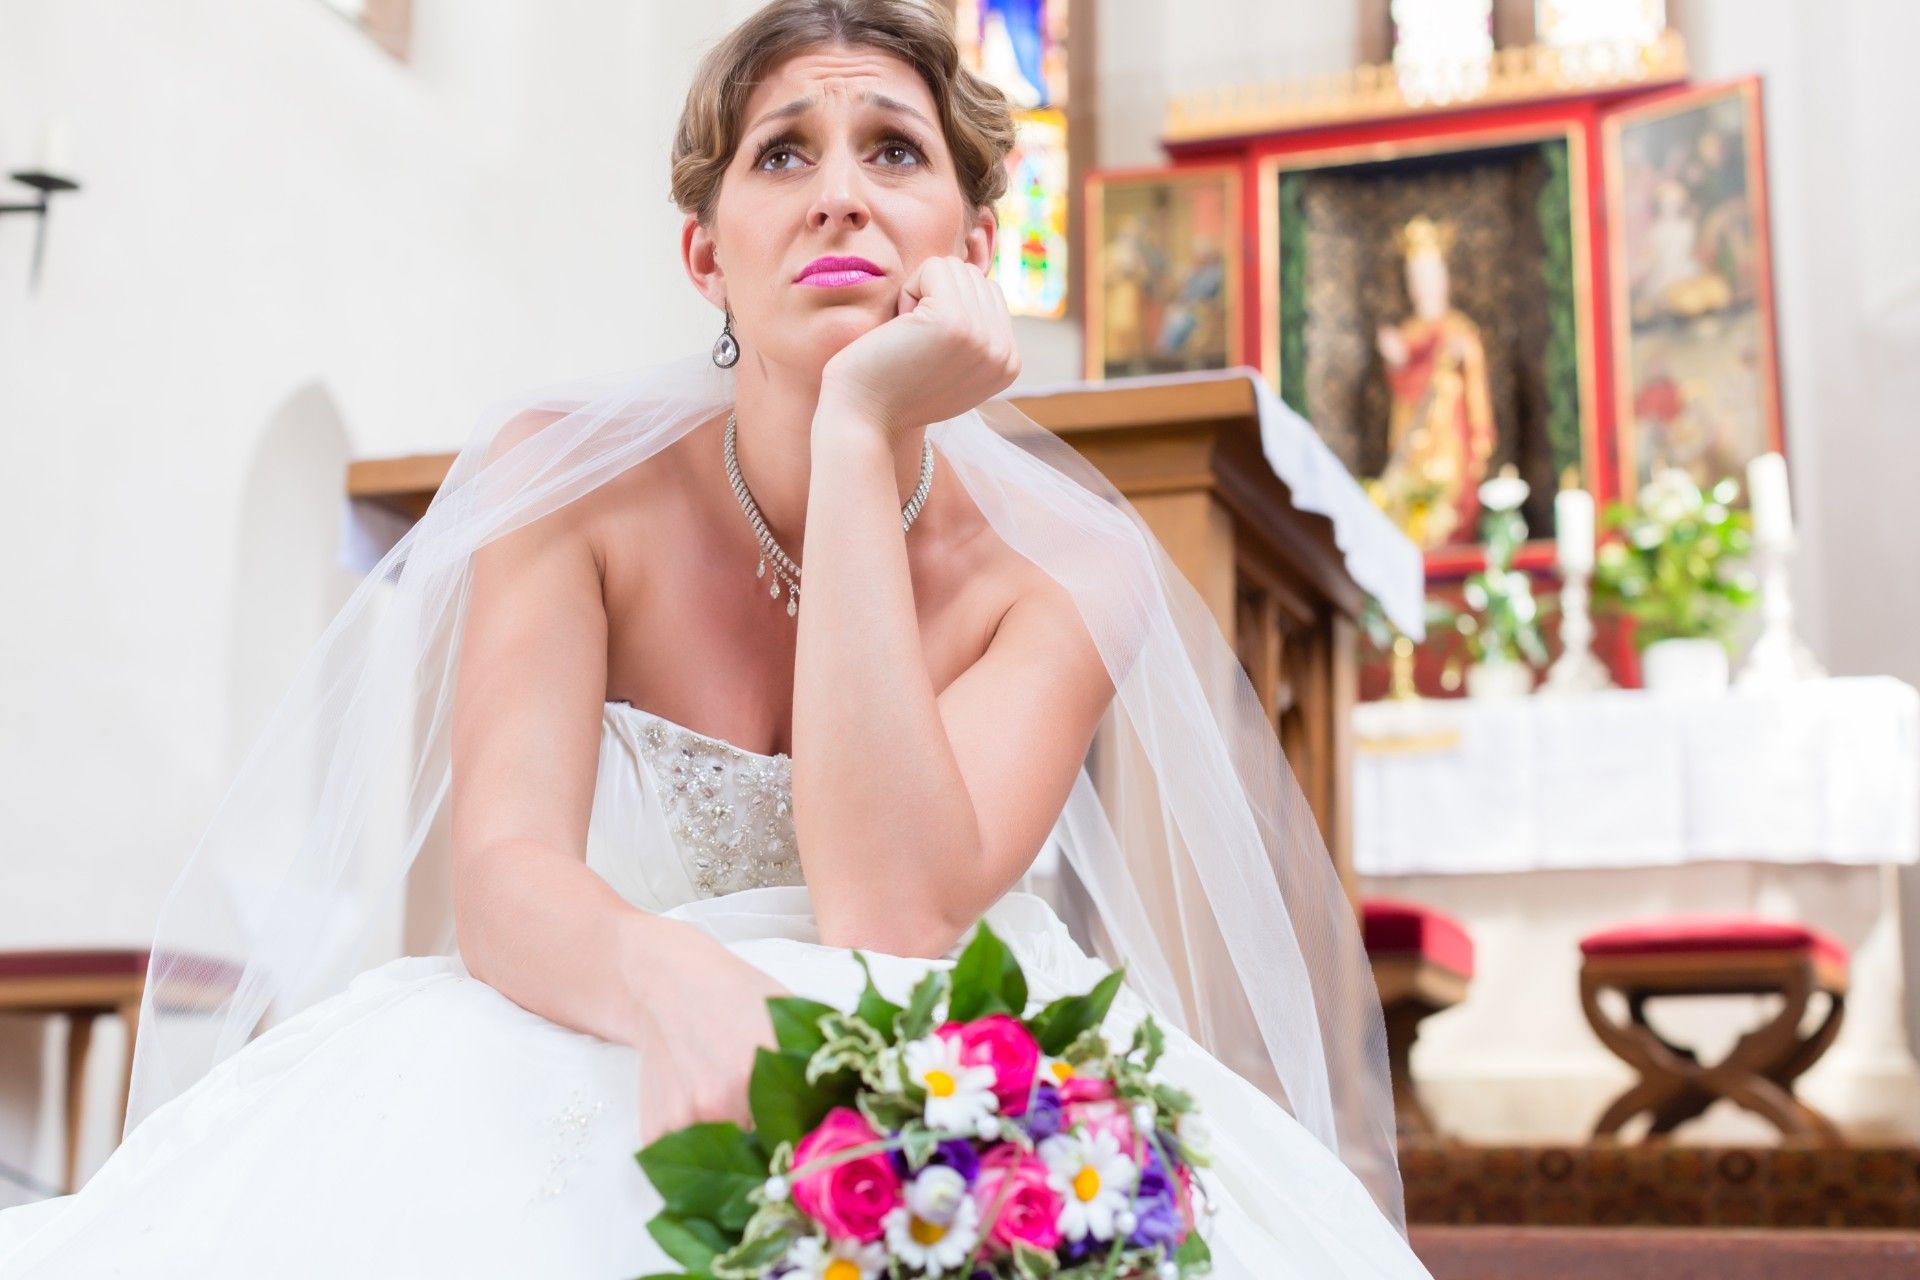 Sad bride sits in church with head on hand - cancelled wedding